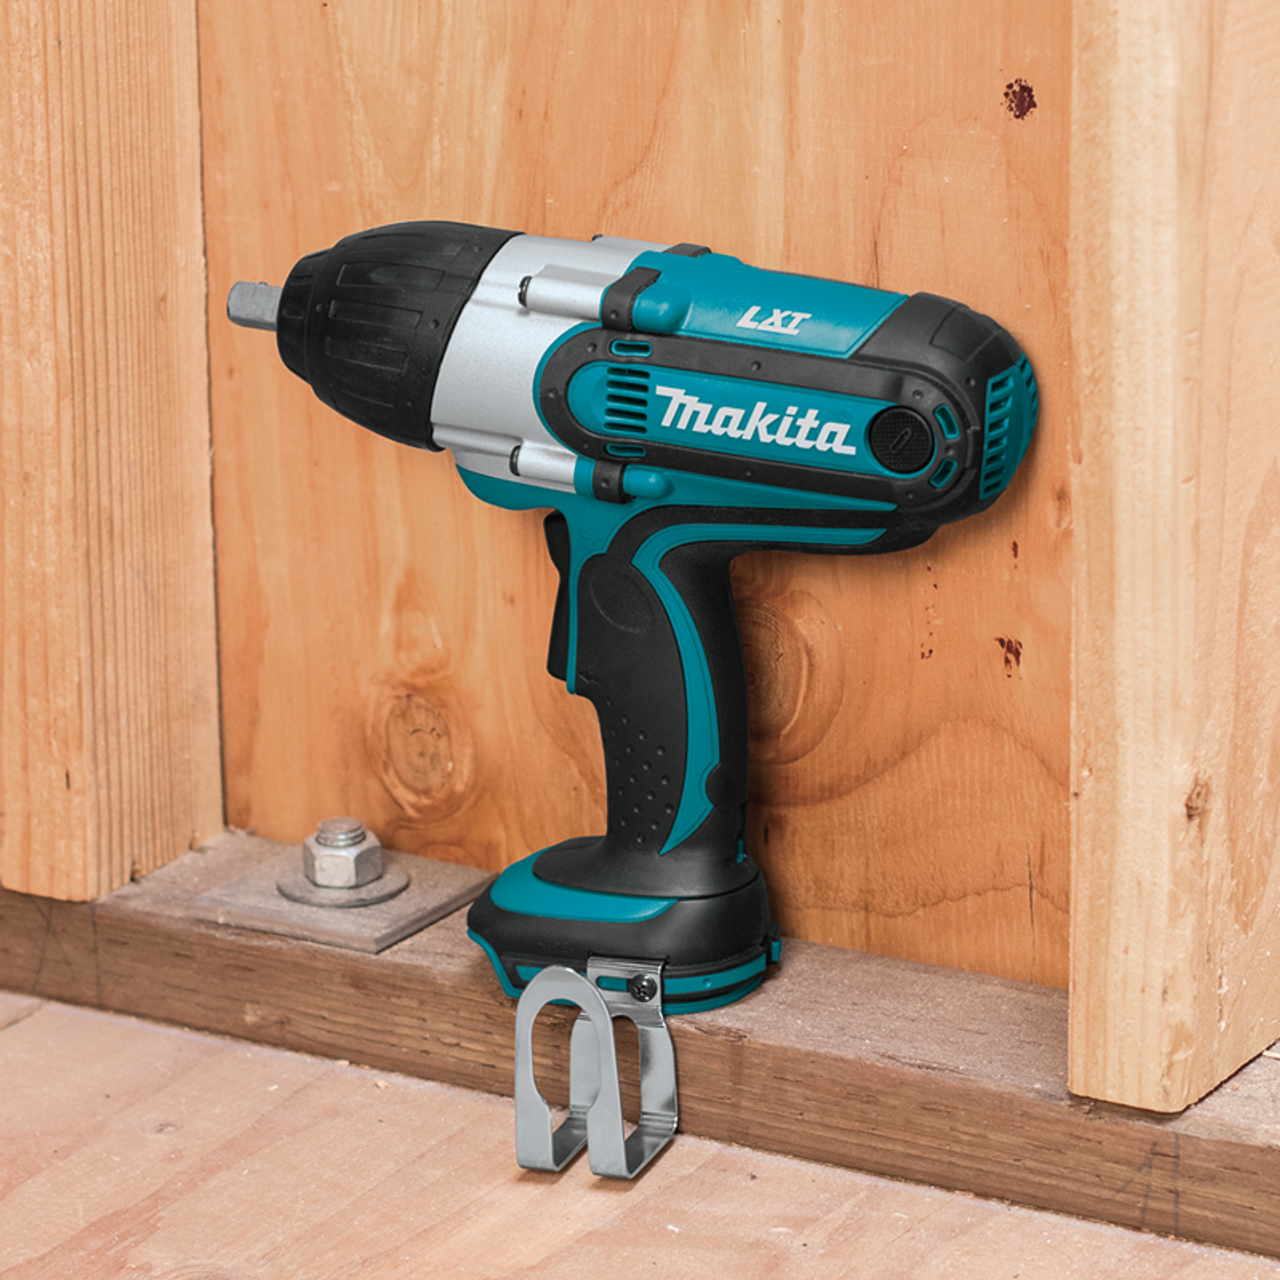 18V LXT? Lithium-Ion Cordless 1/2" Sq. Drive Impact Wrench, Tool Only, Makita-built motor delivers, XWT04Z